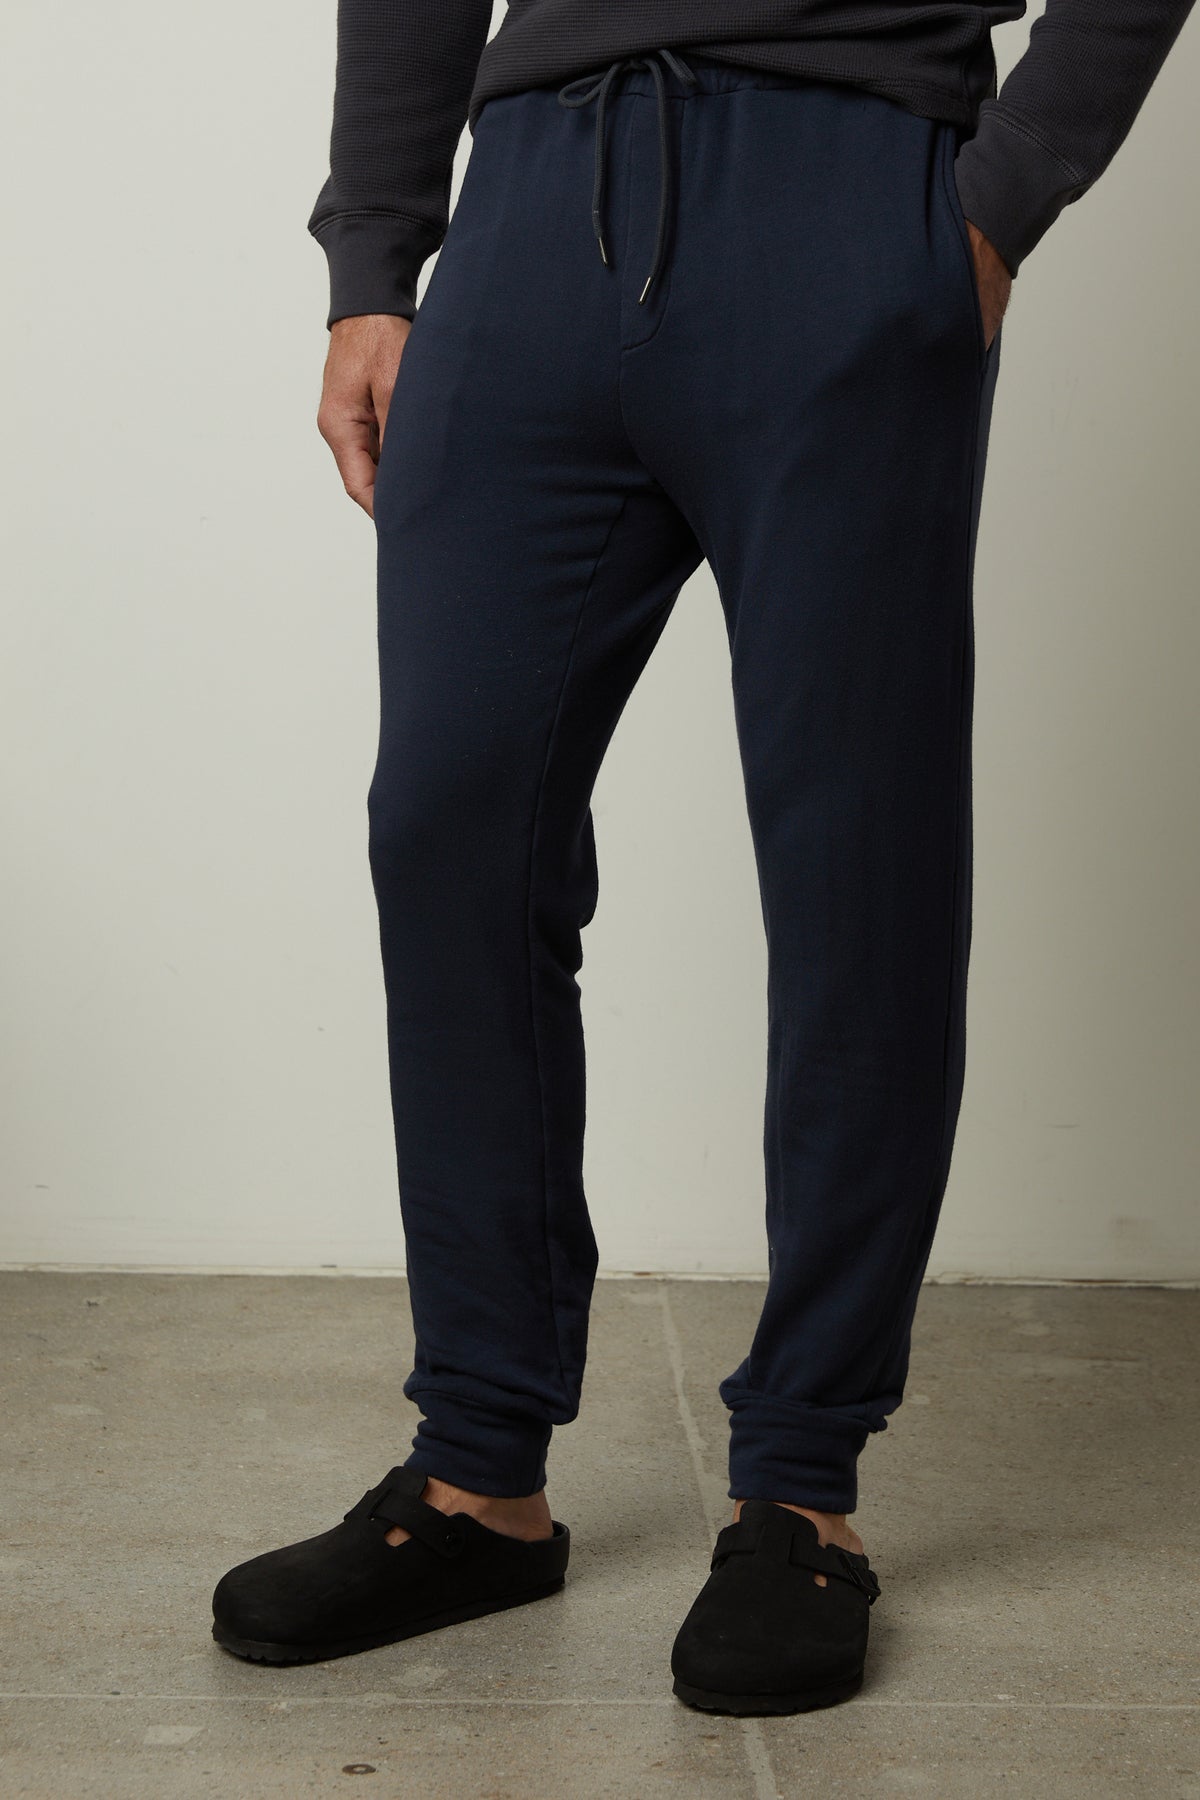 The man is wearing Velvet by Graham & Spencer medium-weight navy Crosby Luxe Fleece Jogger sweatpants for workouts.-35662741176513